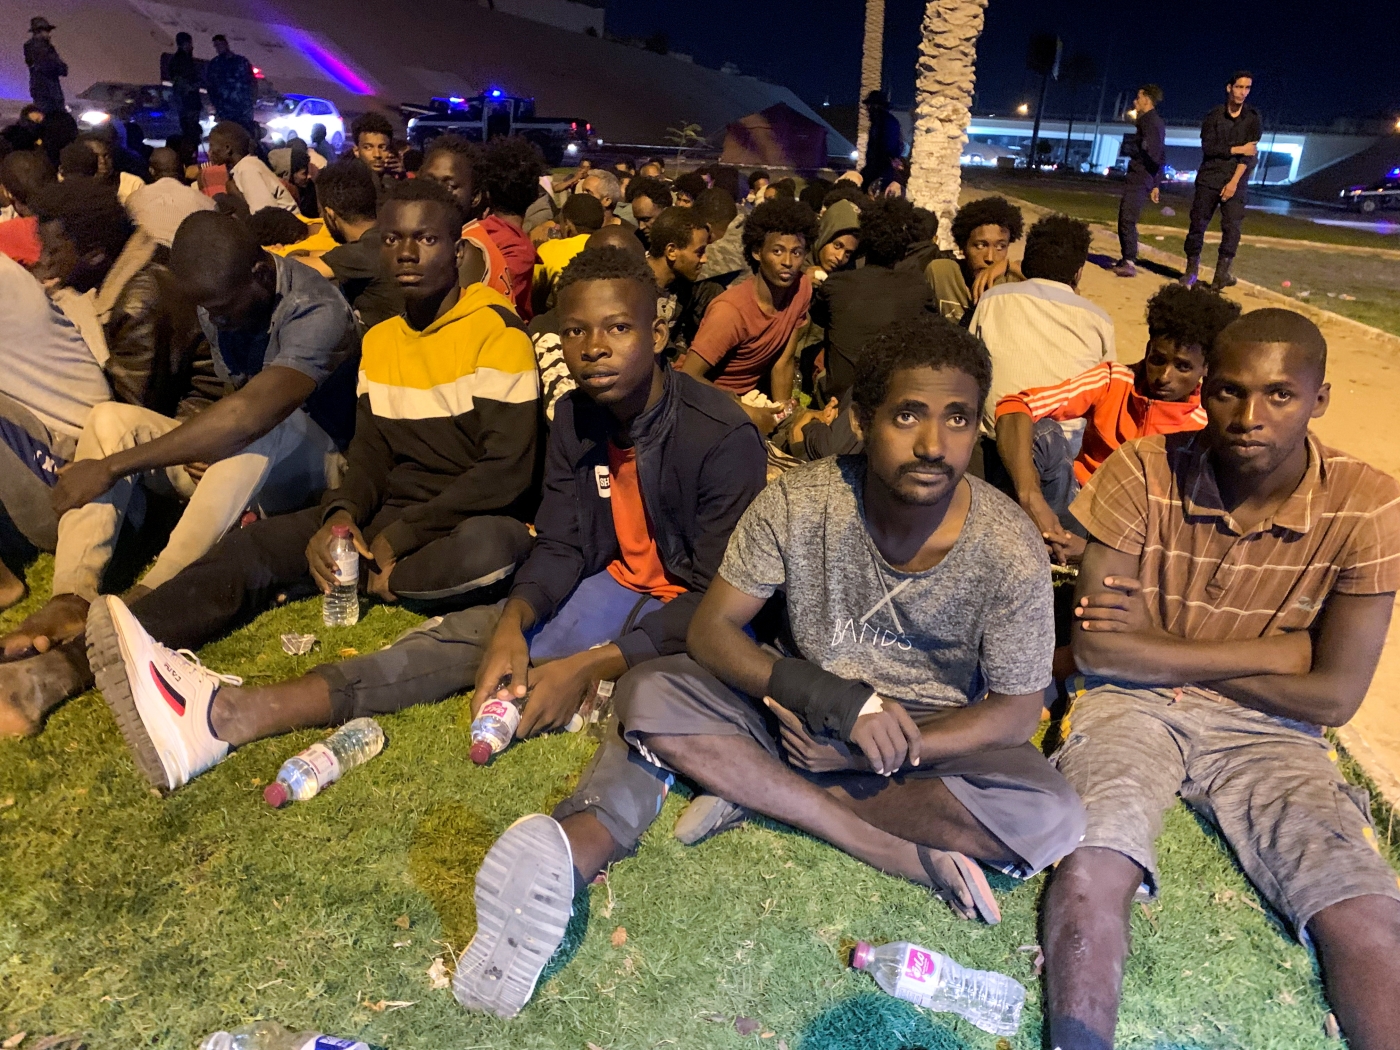 Migrants sit after they were detained by Libyan security forces in Tripoli, Libya on 8 October 2021